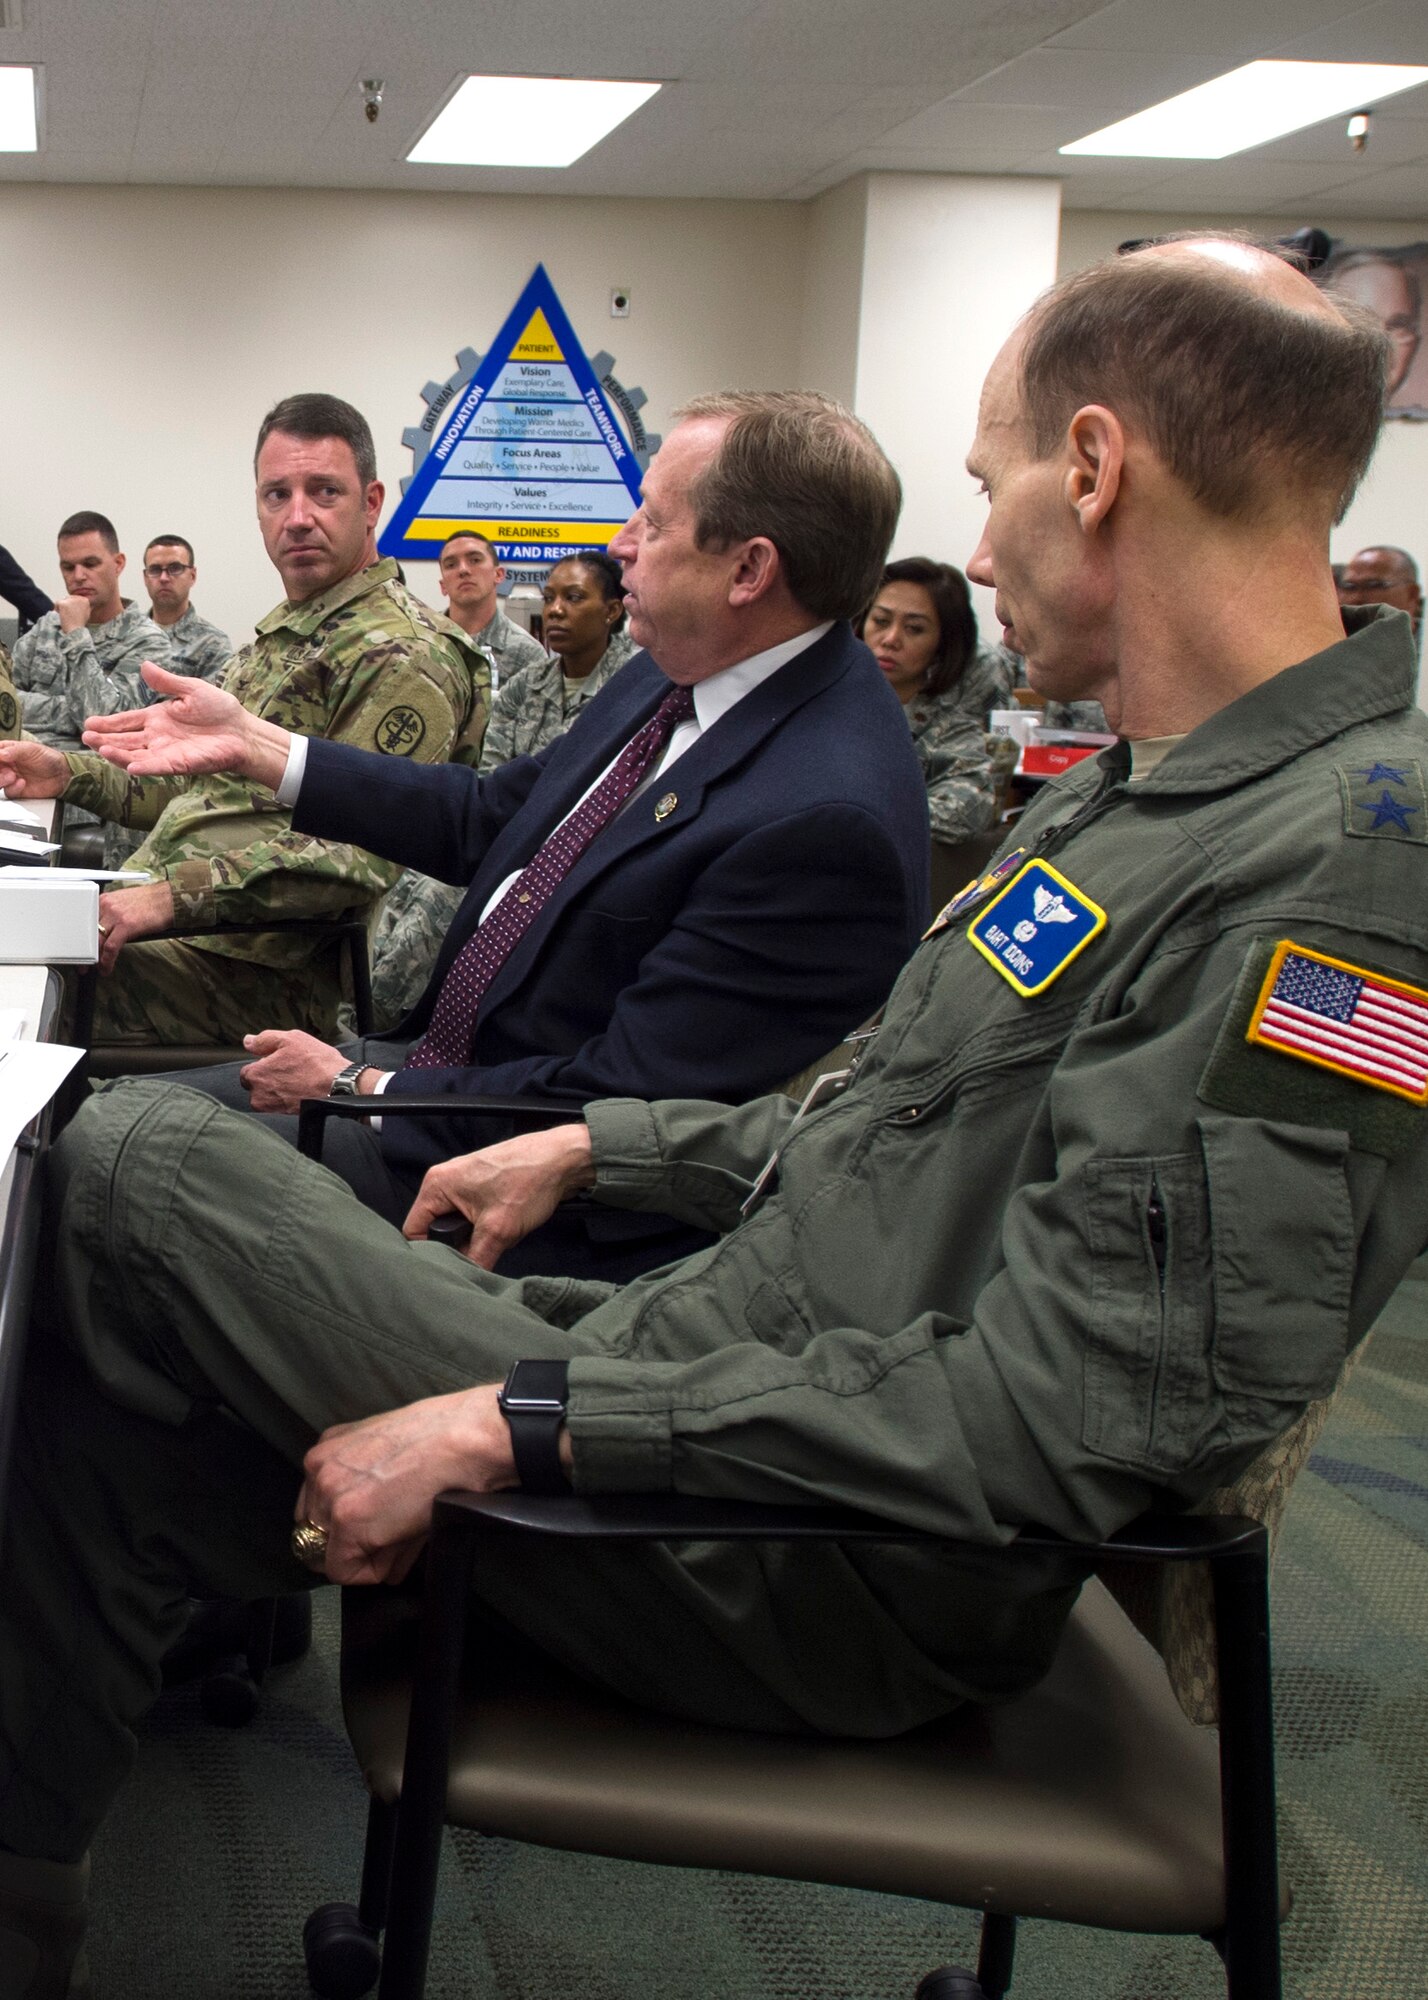 Maj. Gen. Bart Iddins (right), 59th Medical Wing commander, and Army Col. Damon Baine (left), San Antonio Military Health System chief operating officer, listen to Dr. Brent James offer input during a briefing at the Gateway Academy in the Wilford Hall Ambulatory Surgical Center, Joint Base San Antonio-Lackland, Texas, Jan. 11. An internationally known expert in the field of clinical quality improvement, James shared lessons learned from previous job encounters from the past 30 years. He is executive director of the Institute for Health Care Delivery Research and vice president, Medical Research and Continuing Medical Education at Intermountain Healthcare in Salt Lake City, Utah. (U.S. Air Force photo/Staff Sgt. Kevin Iinuma)